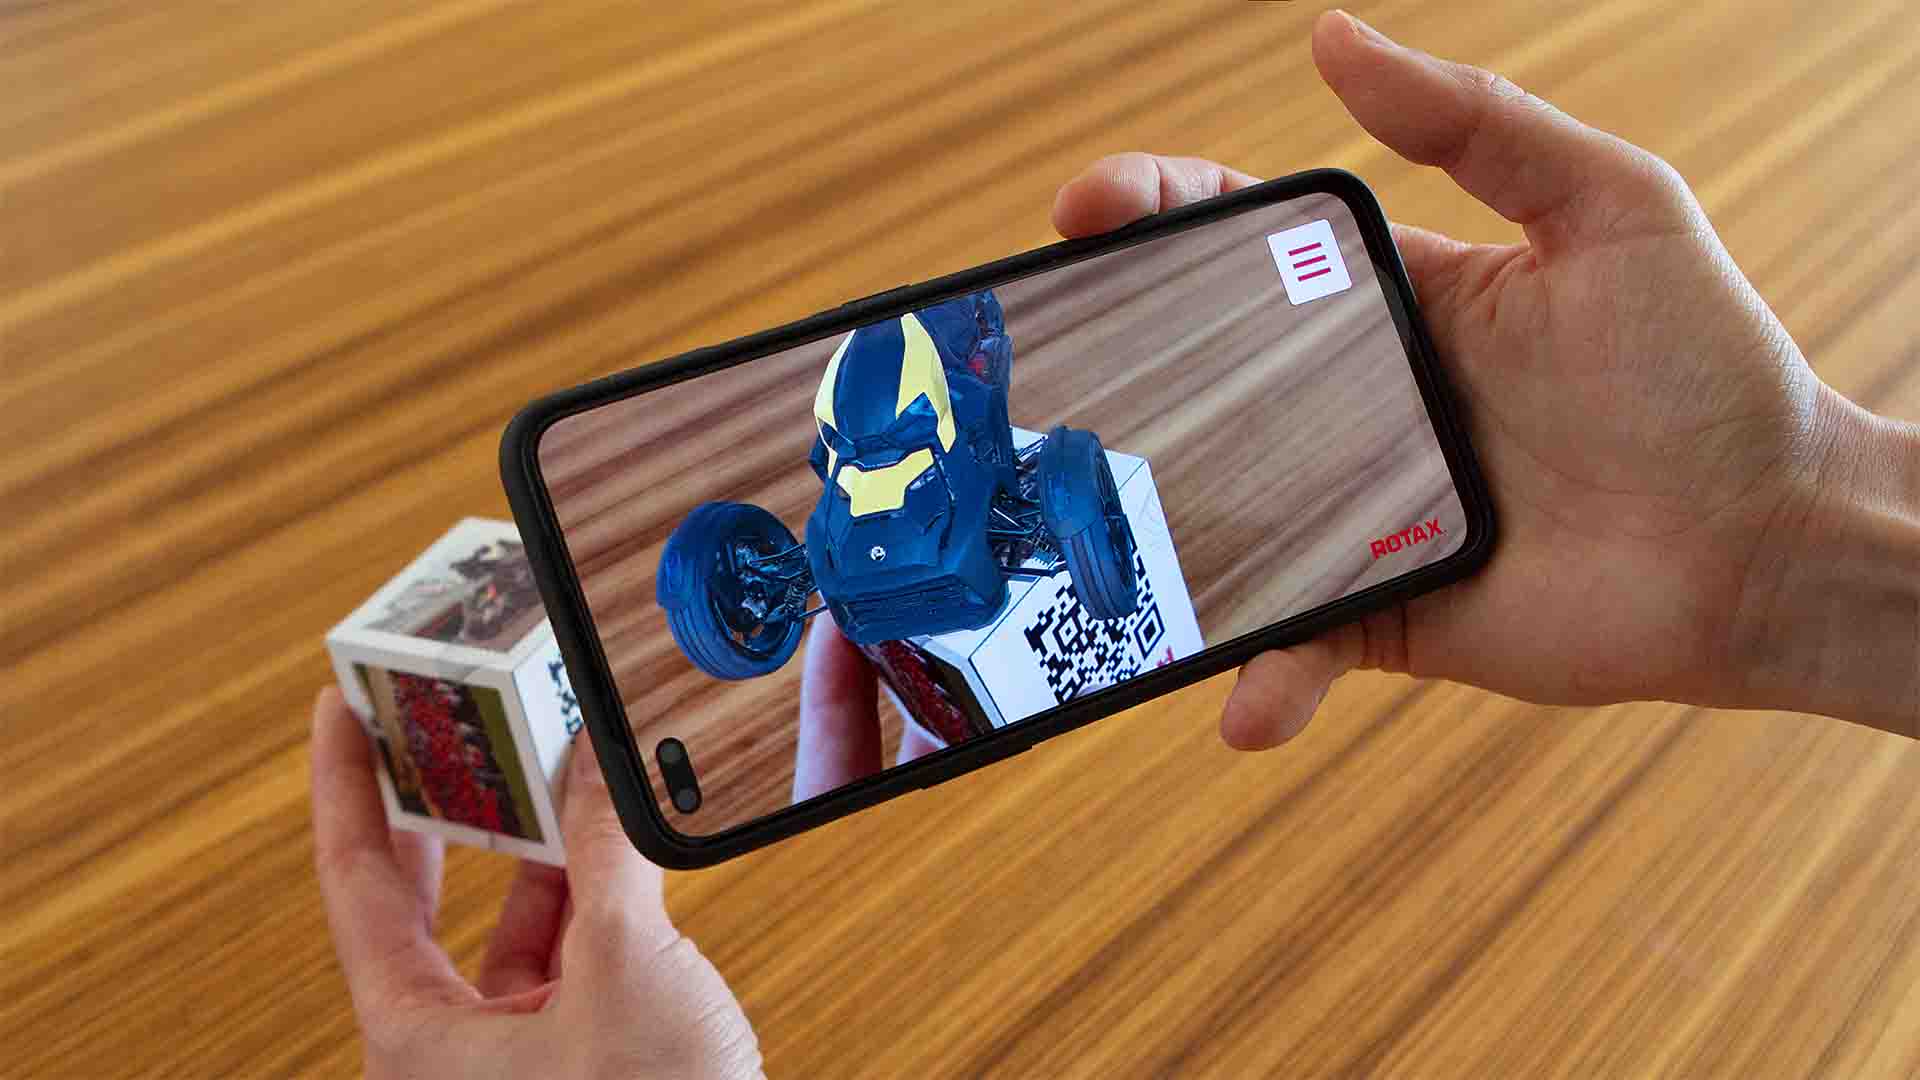 The „Rotax 100+“ Augmented Reality app brings a 6-sided real cube to life by showing digital, interactive content for each side.